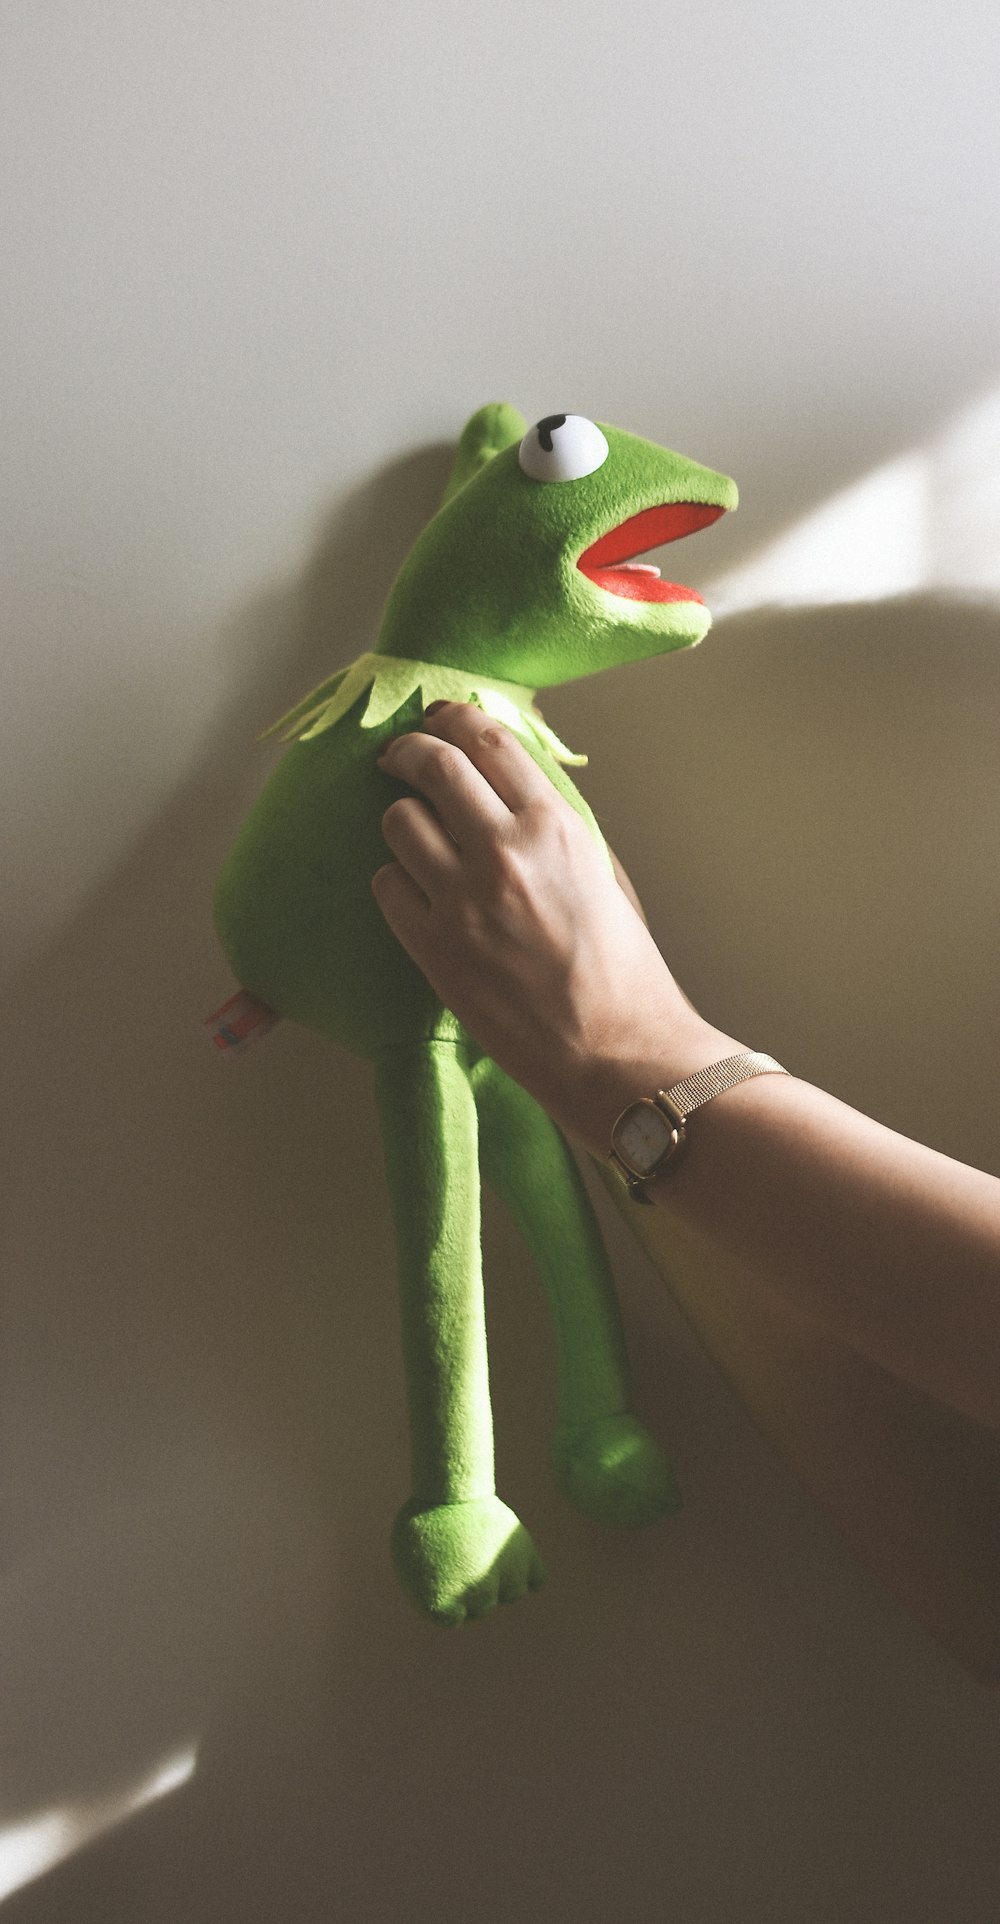 green frog plush toy on persons hand